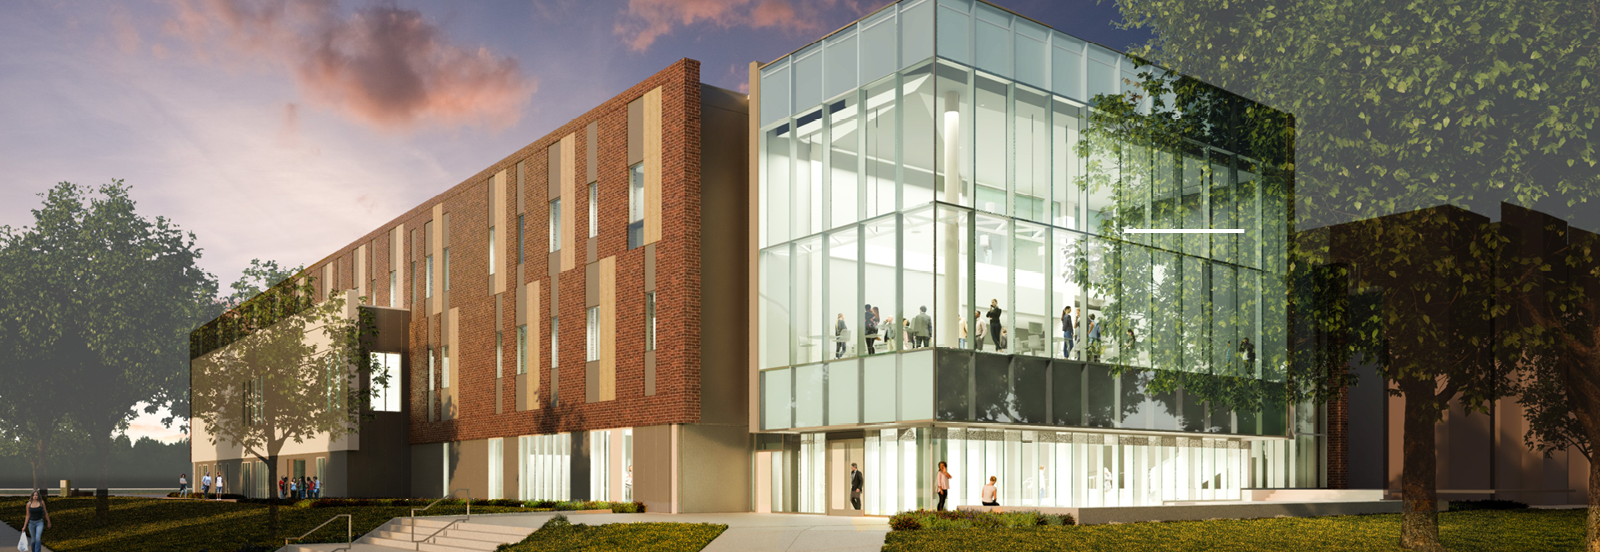 Rendering of the under construction STEM Research & Classroom Building